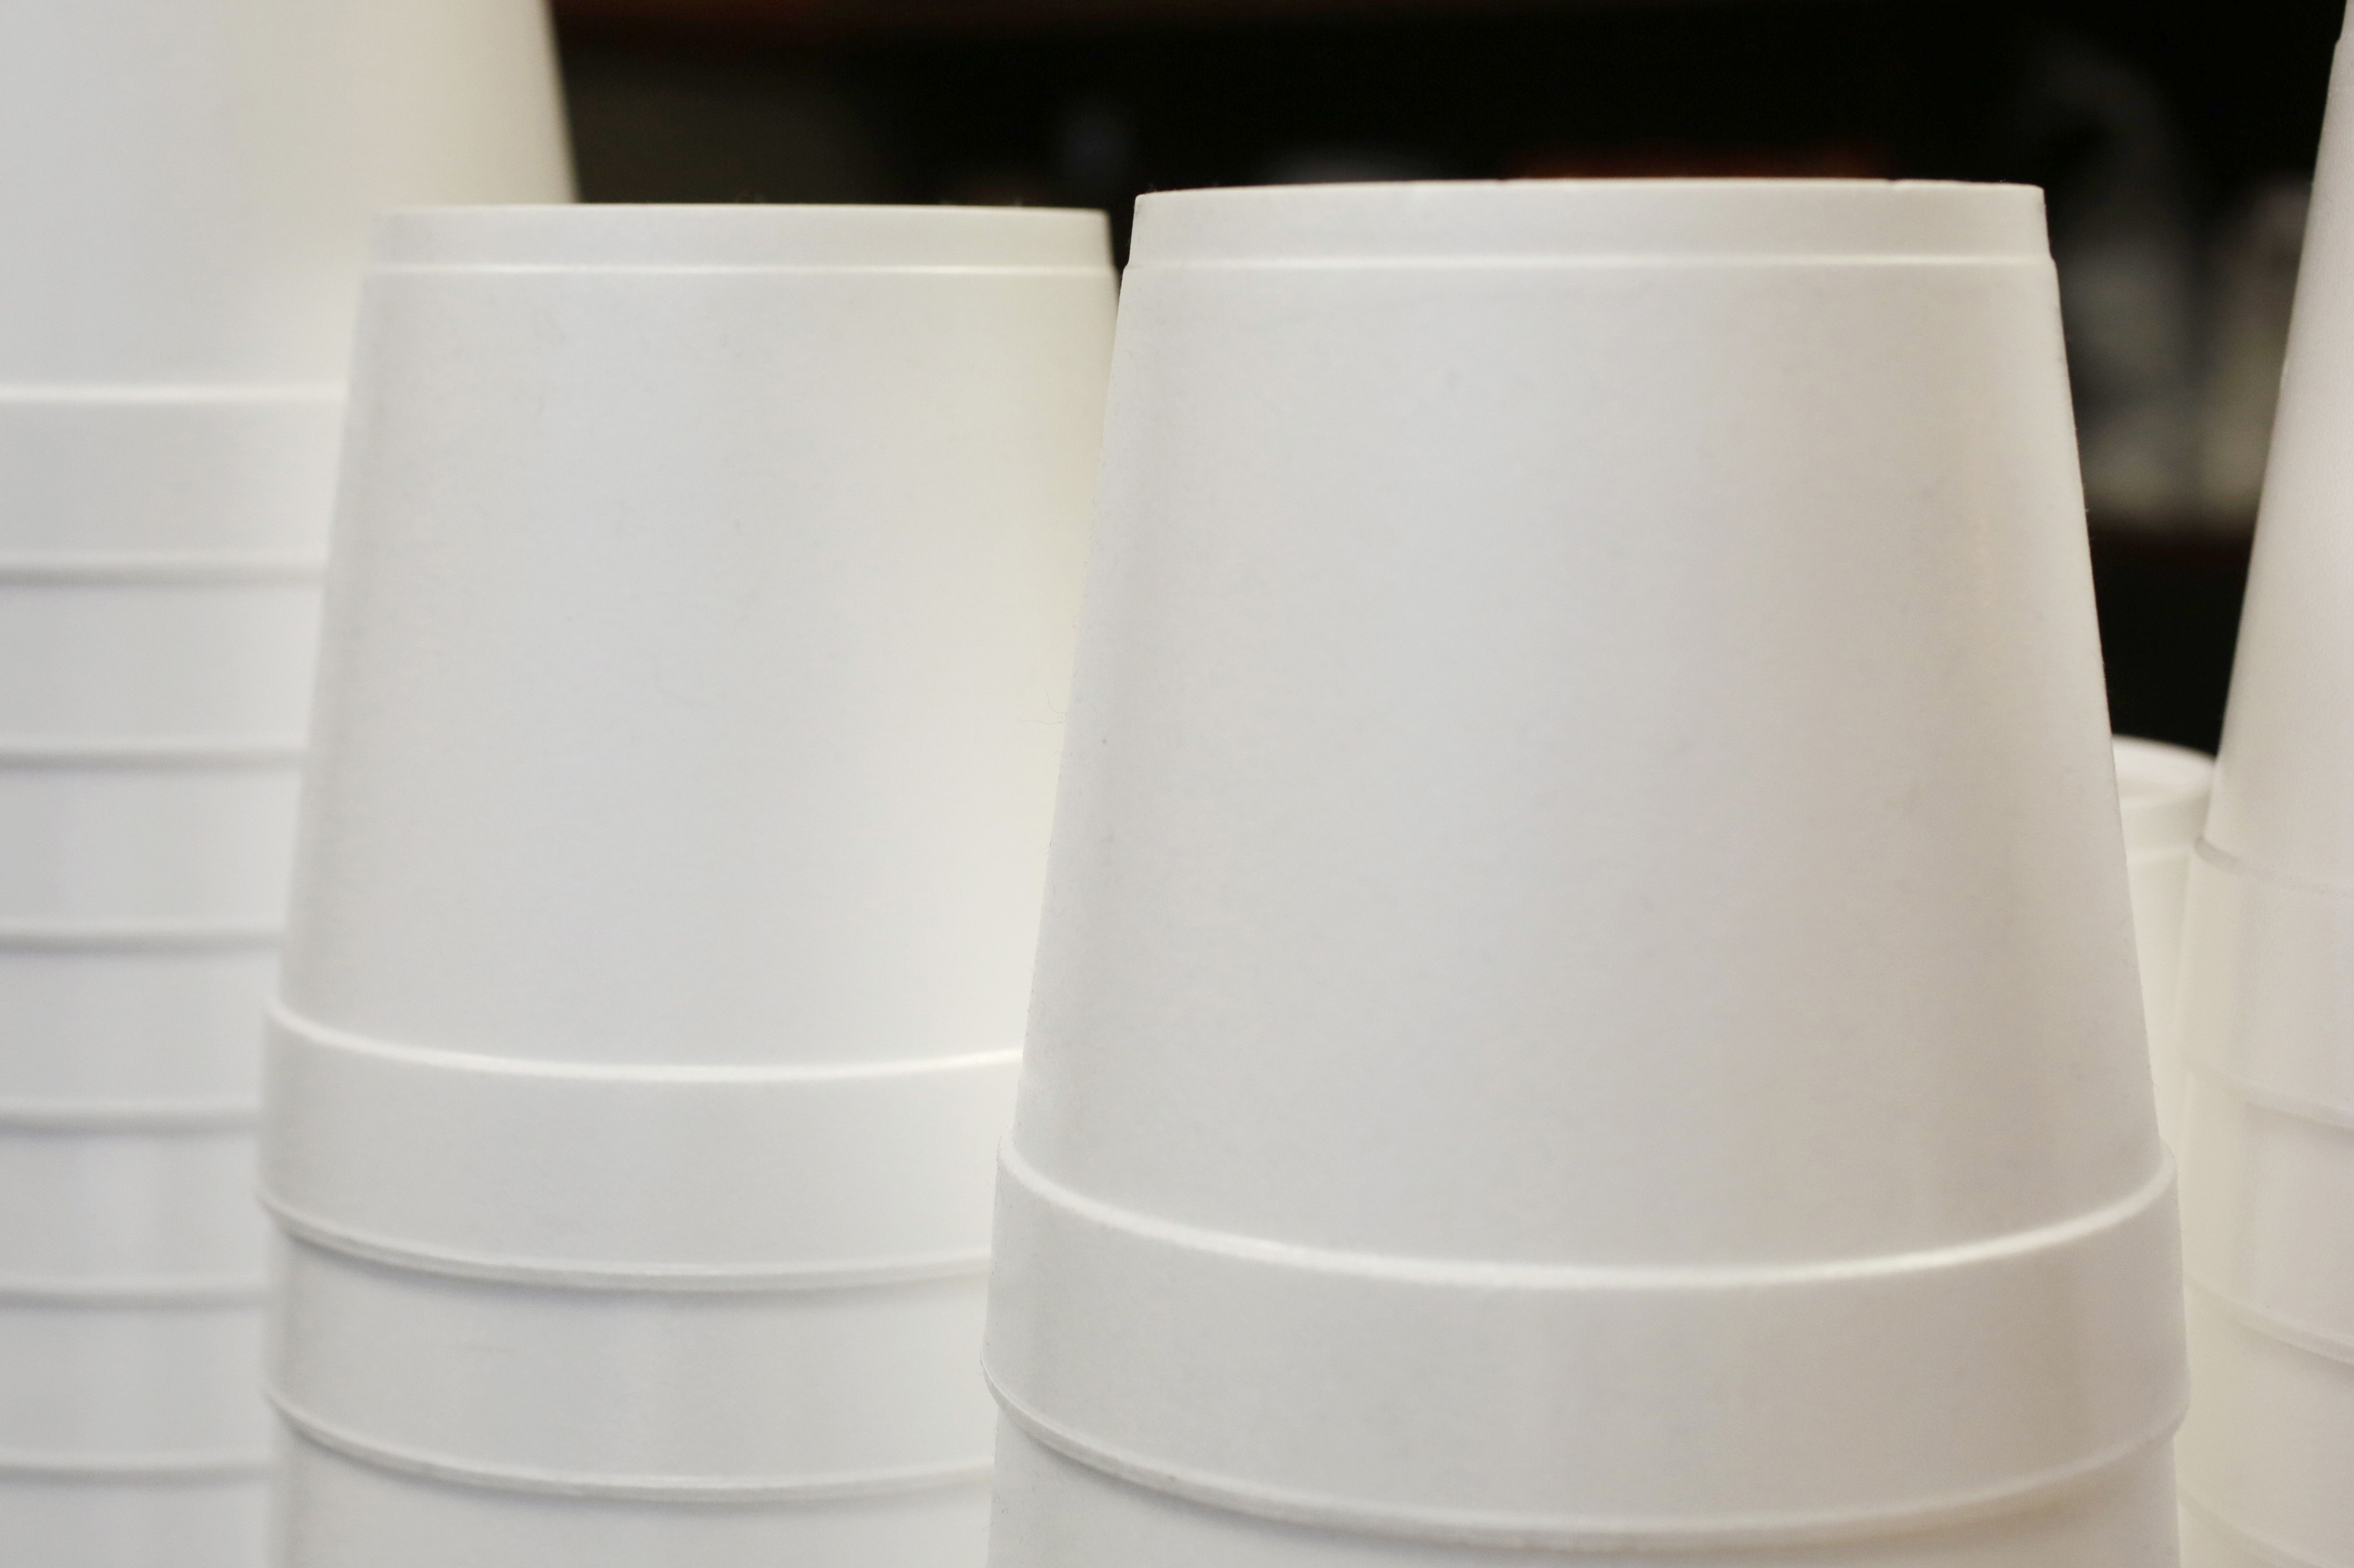 Here's what Maine's ban on foam containers means for restaurants